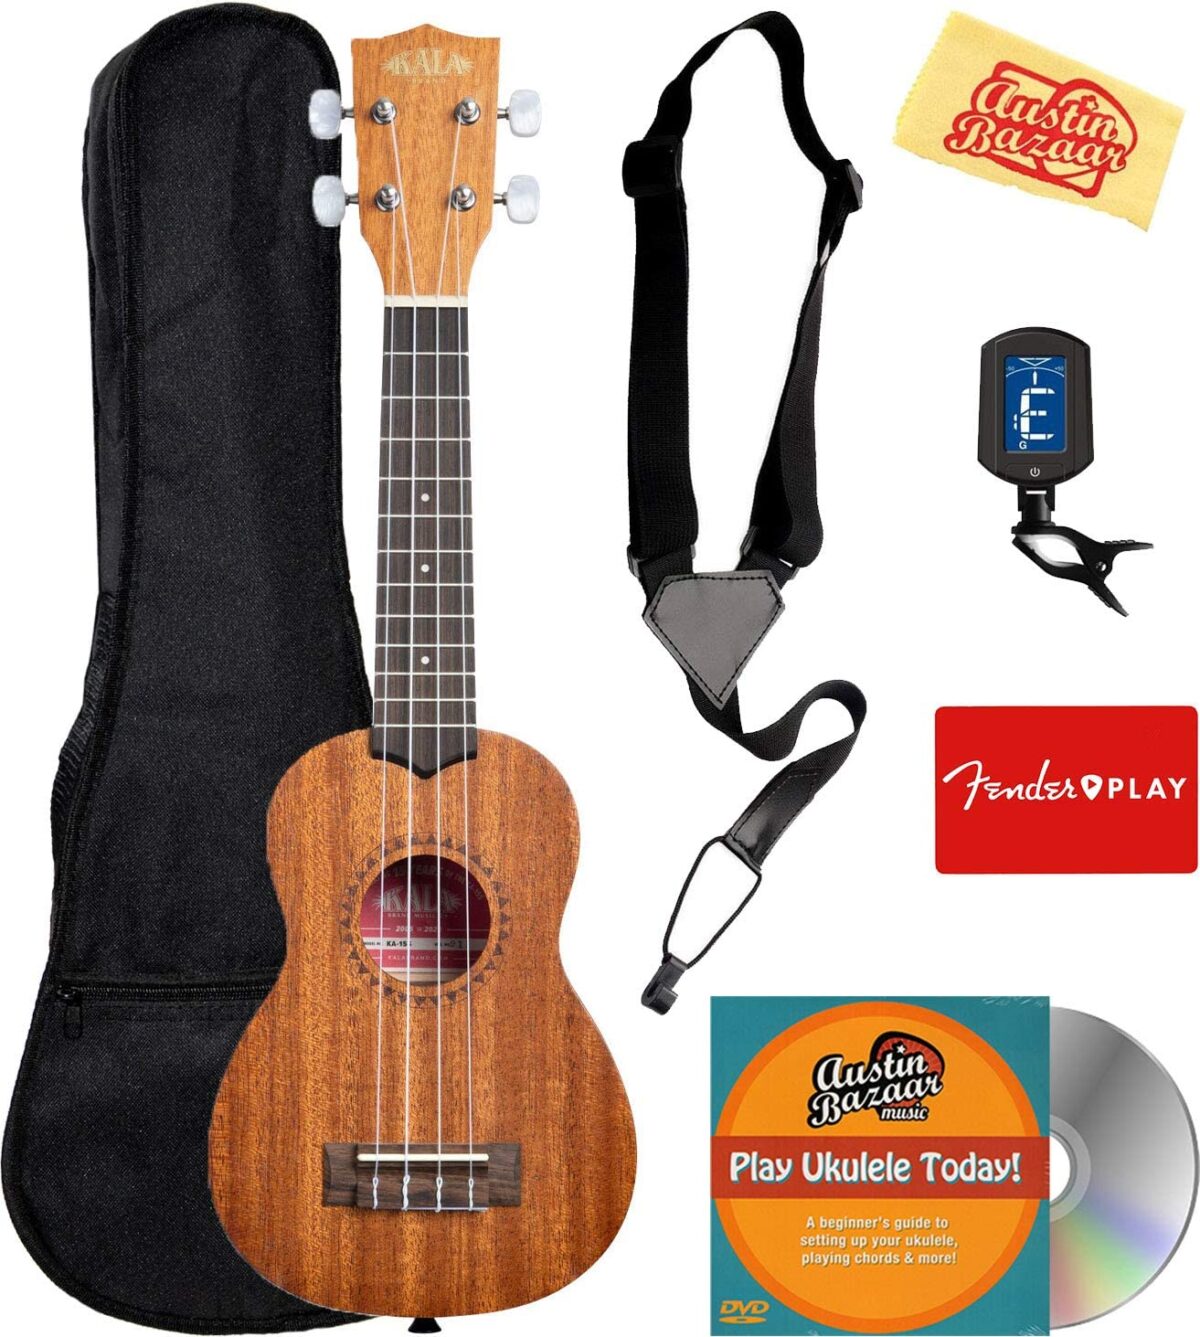 What are the Best Ukuleles for the Money?